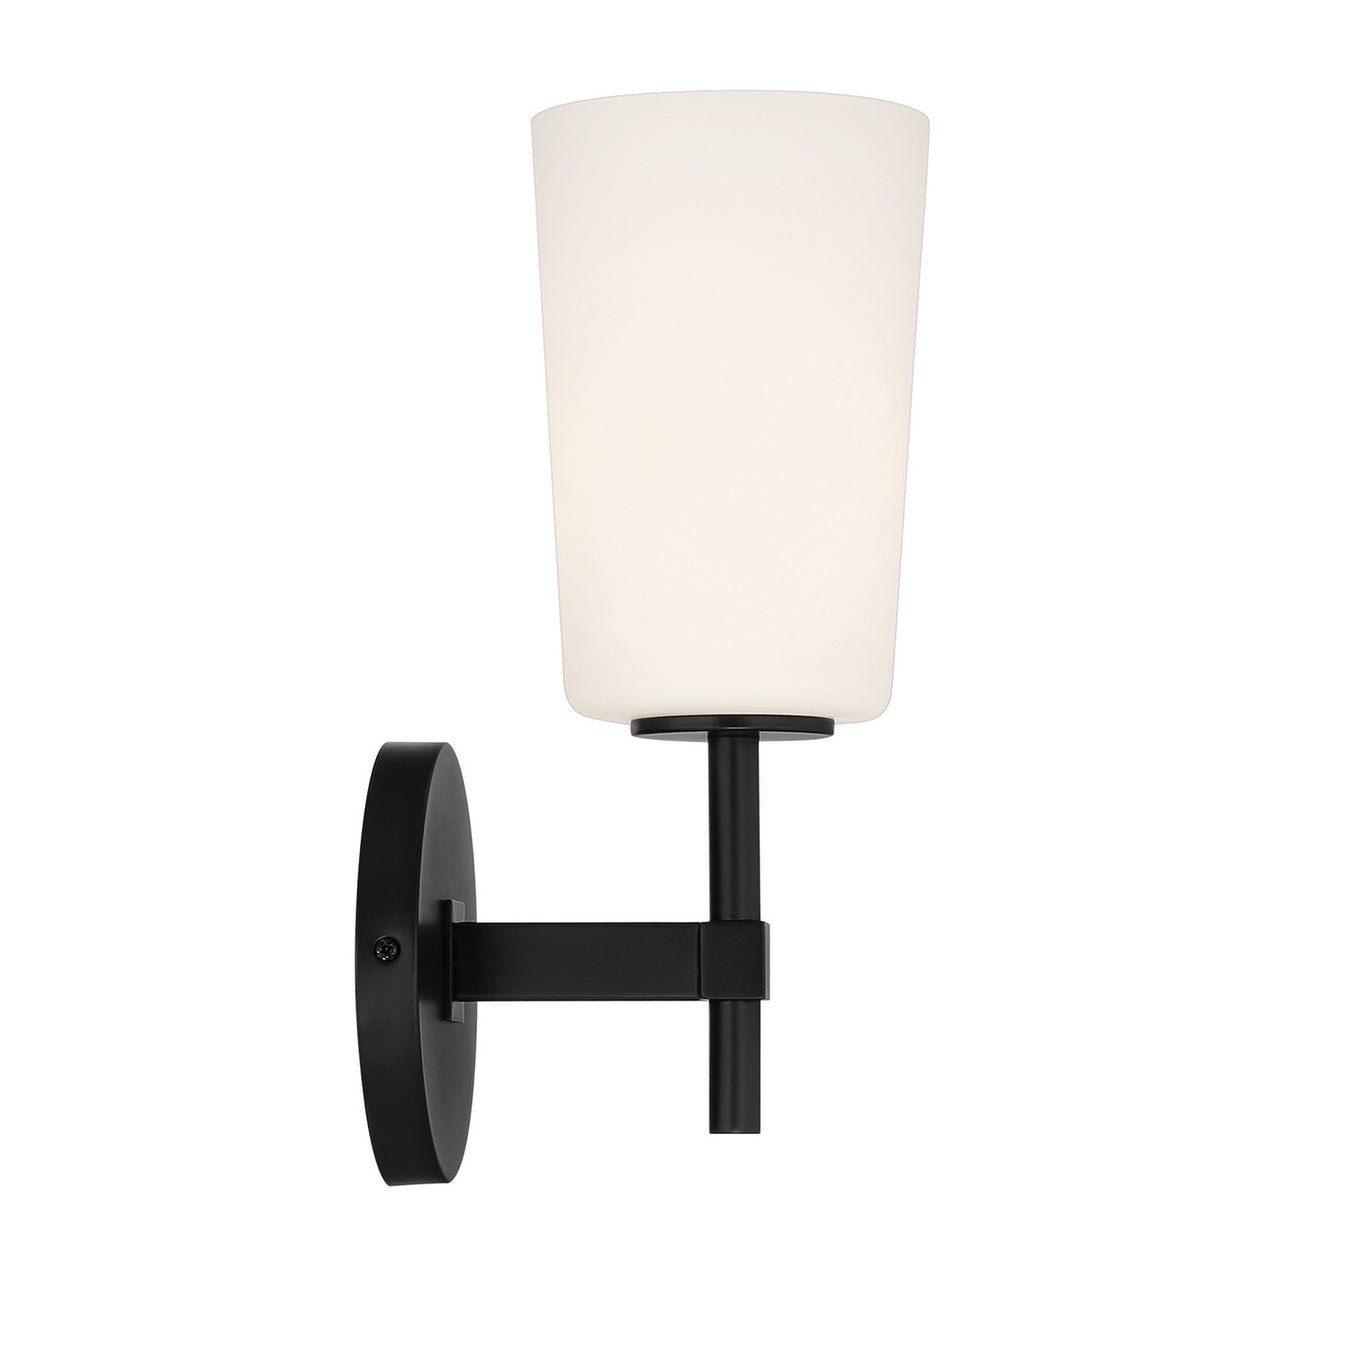 Colton 1-Light Wall Mount in Black by Crystorama - MPN COL-101-BK